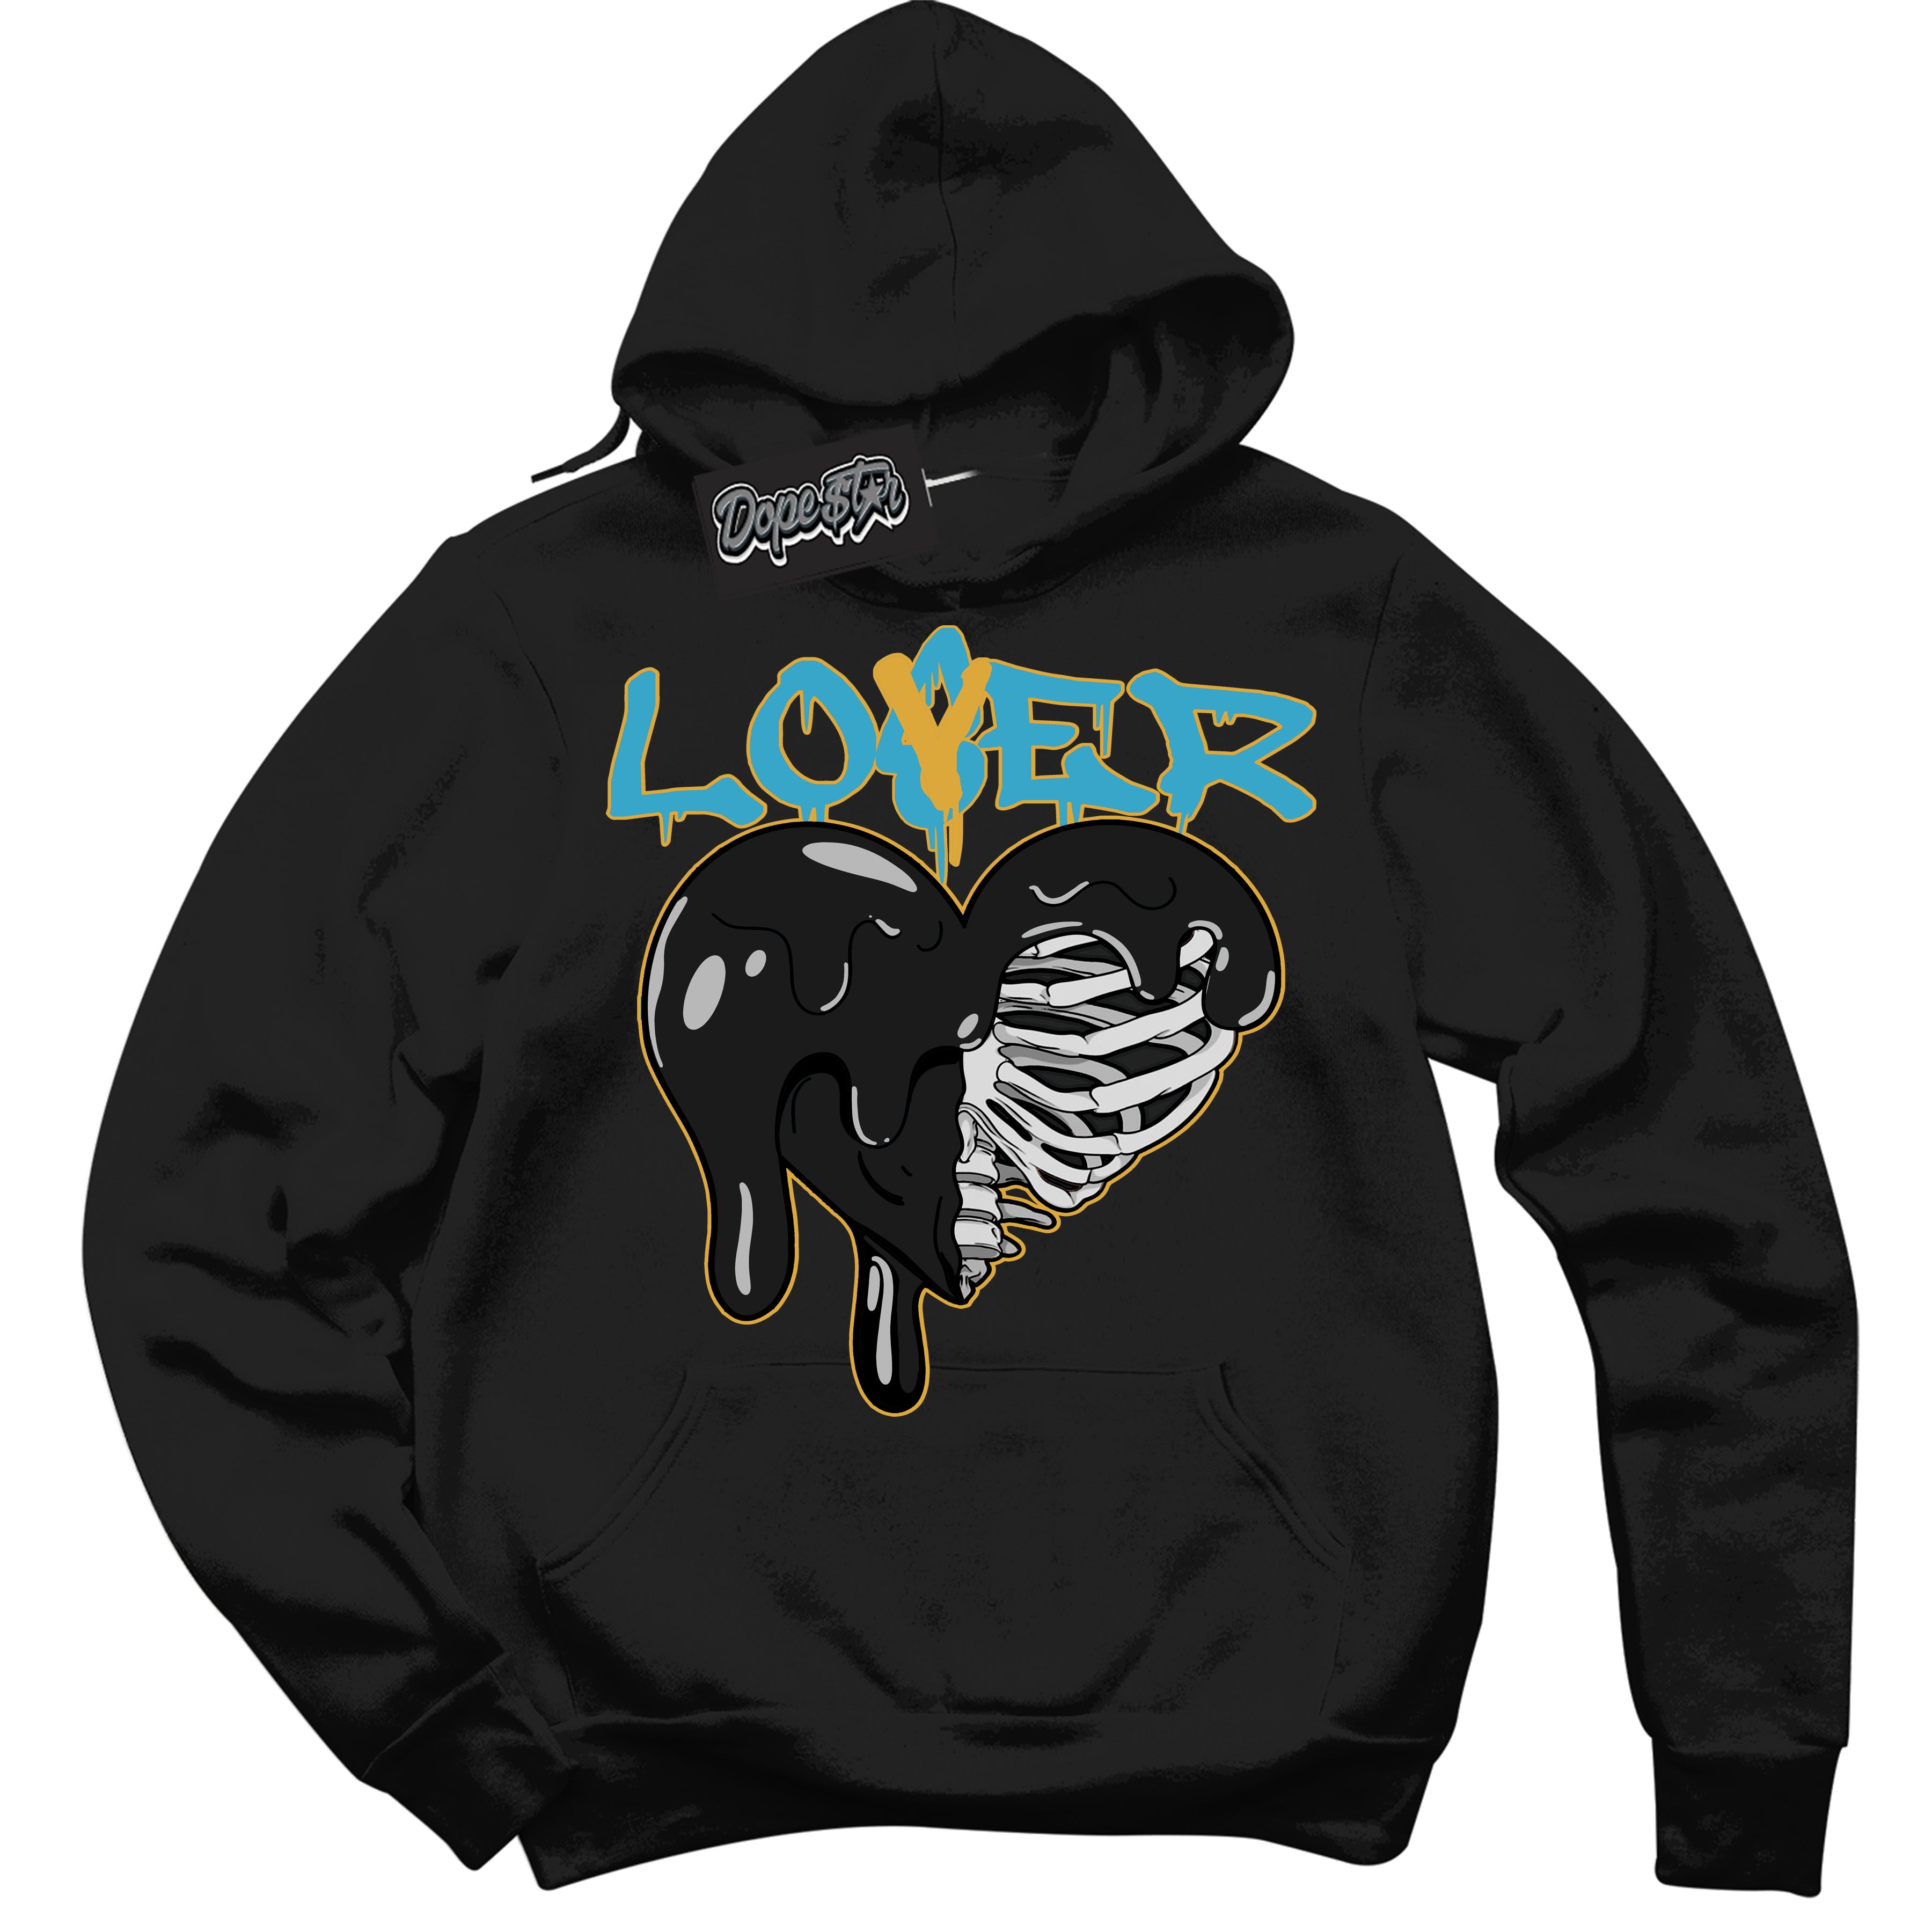 Cool Black Hoodie with “ Lover Loser ”  design that Perfectly Matches Aqua 5s Sneakers.